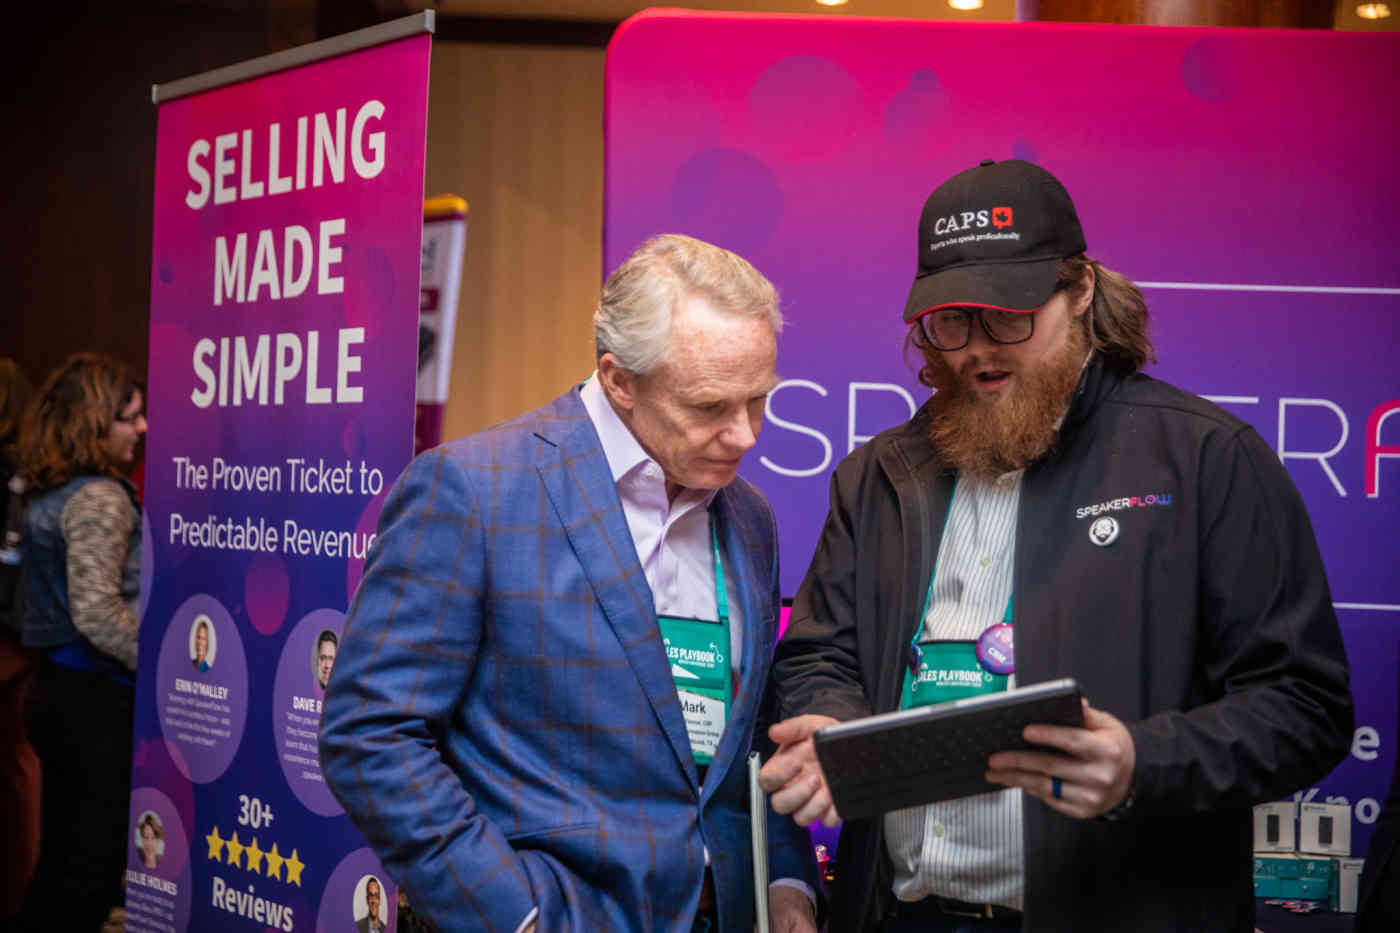 Two men stand in front of signage at a conference. One of them holds a tablet. The sign behind them reads "Selling made simple."